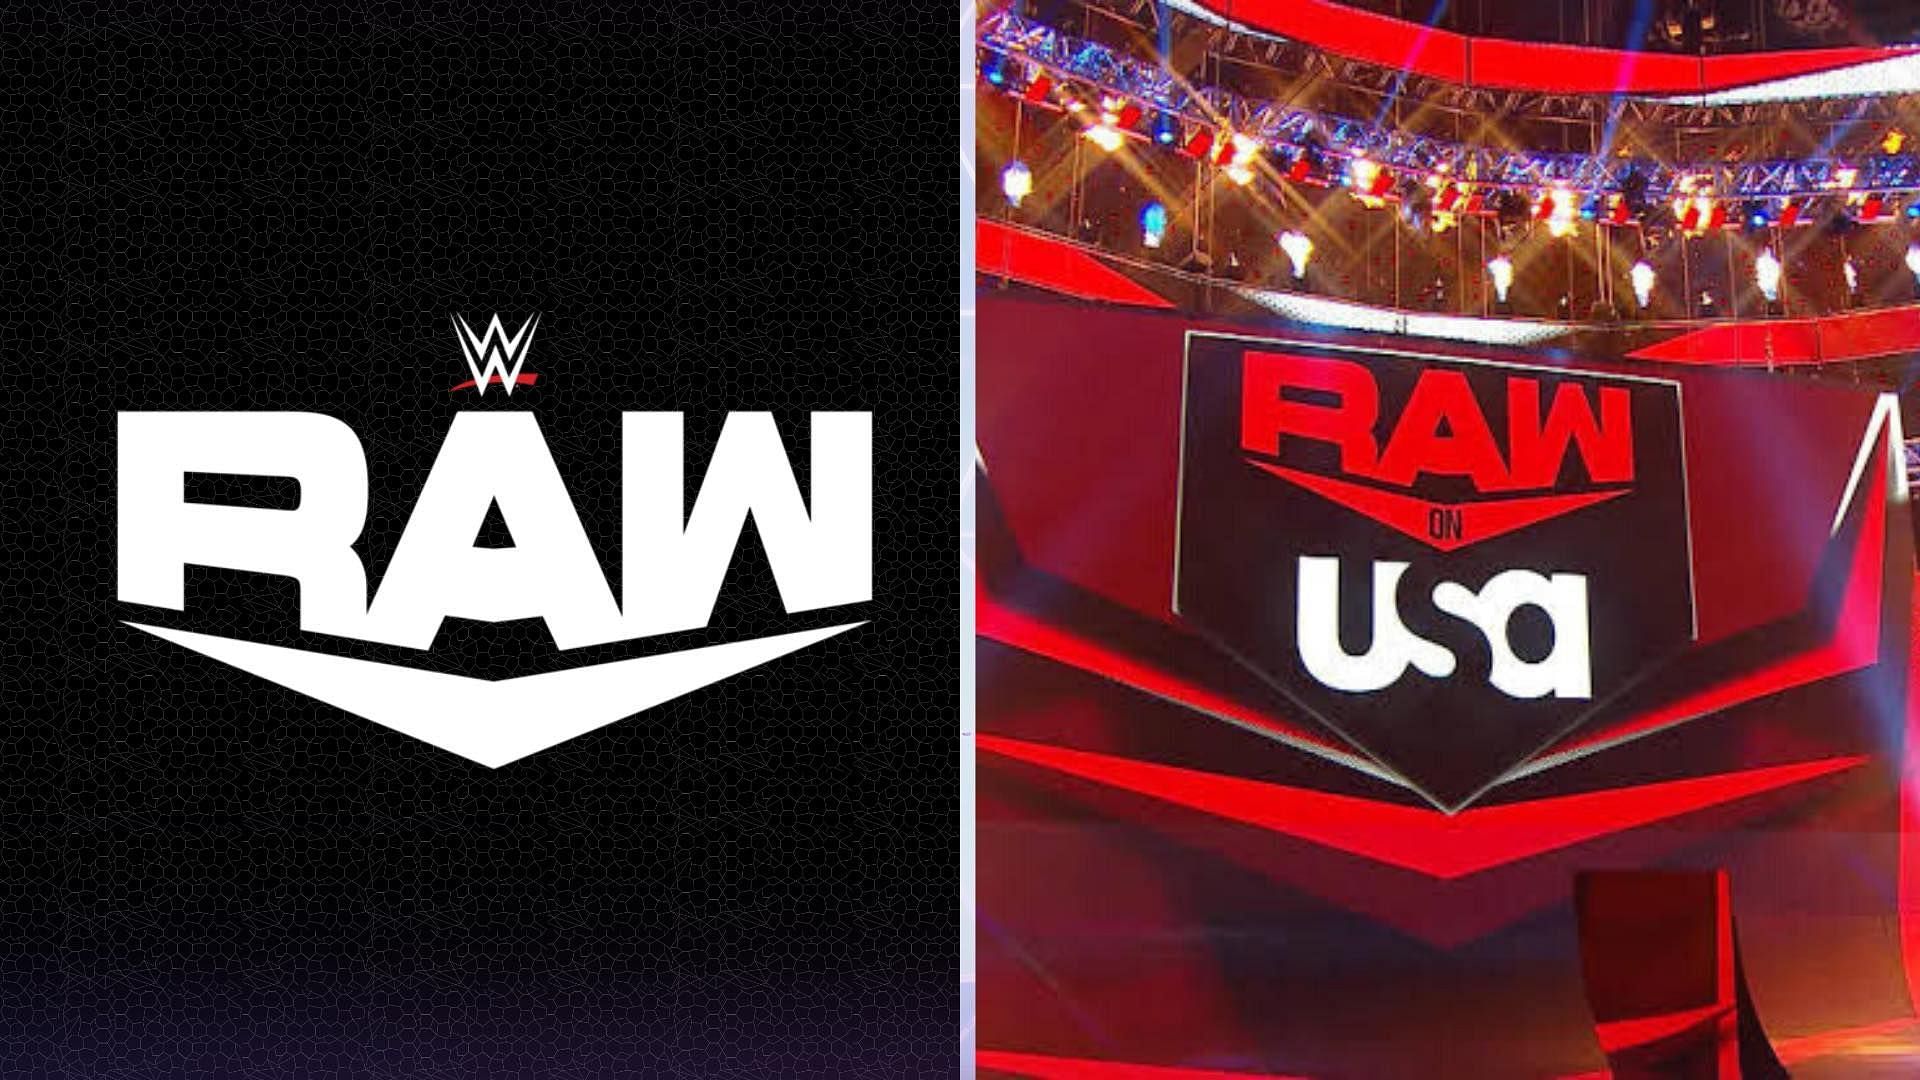 WWE RAW this week was live from the Moda Center in Portland, Oregon